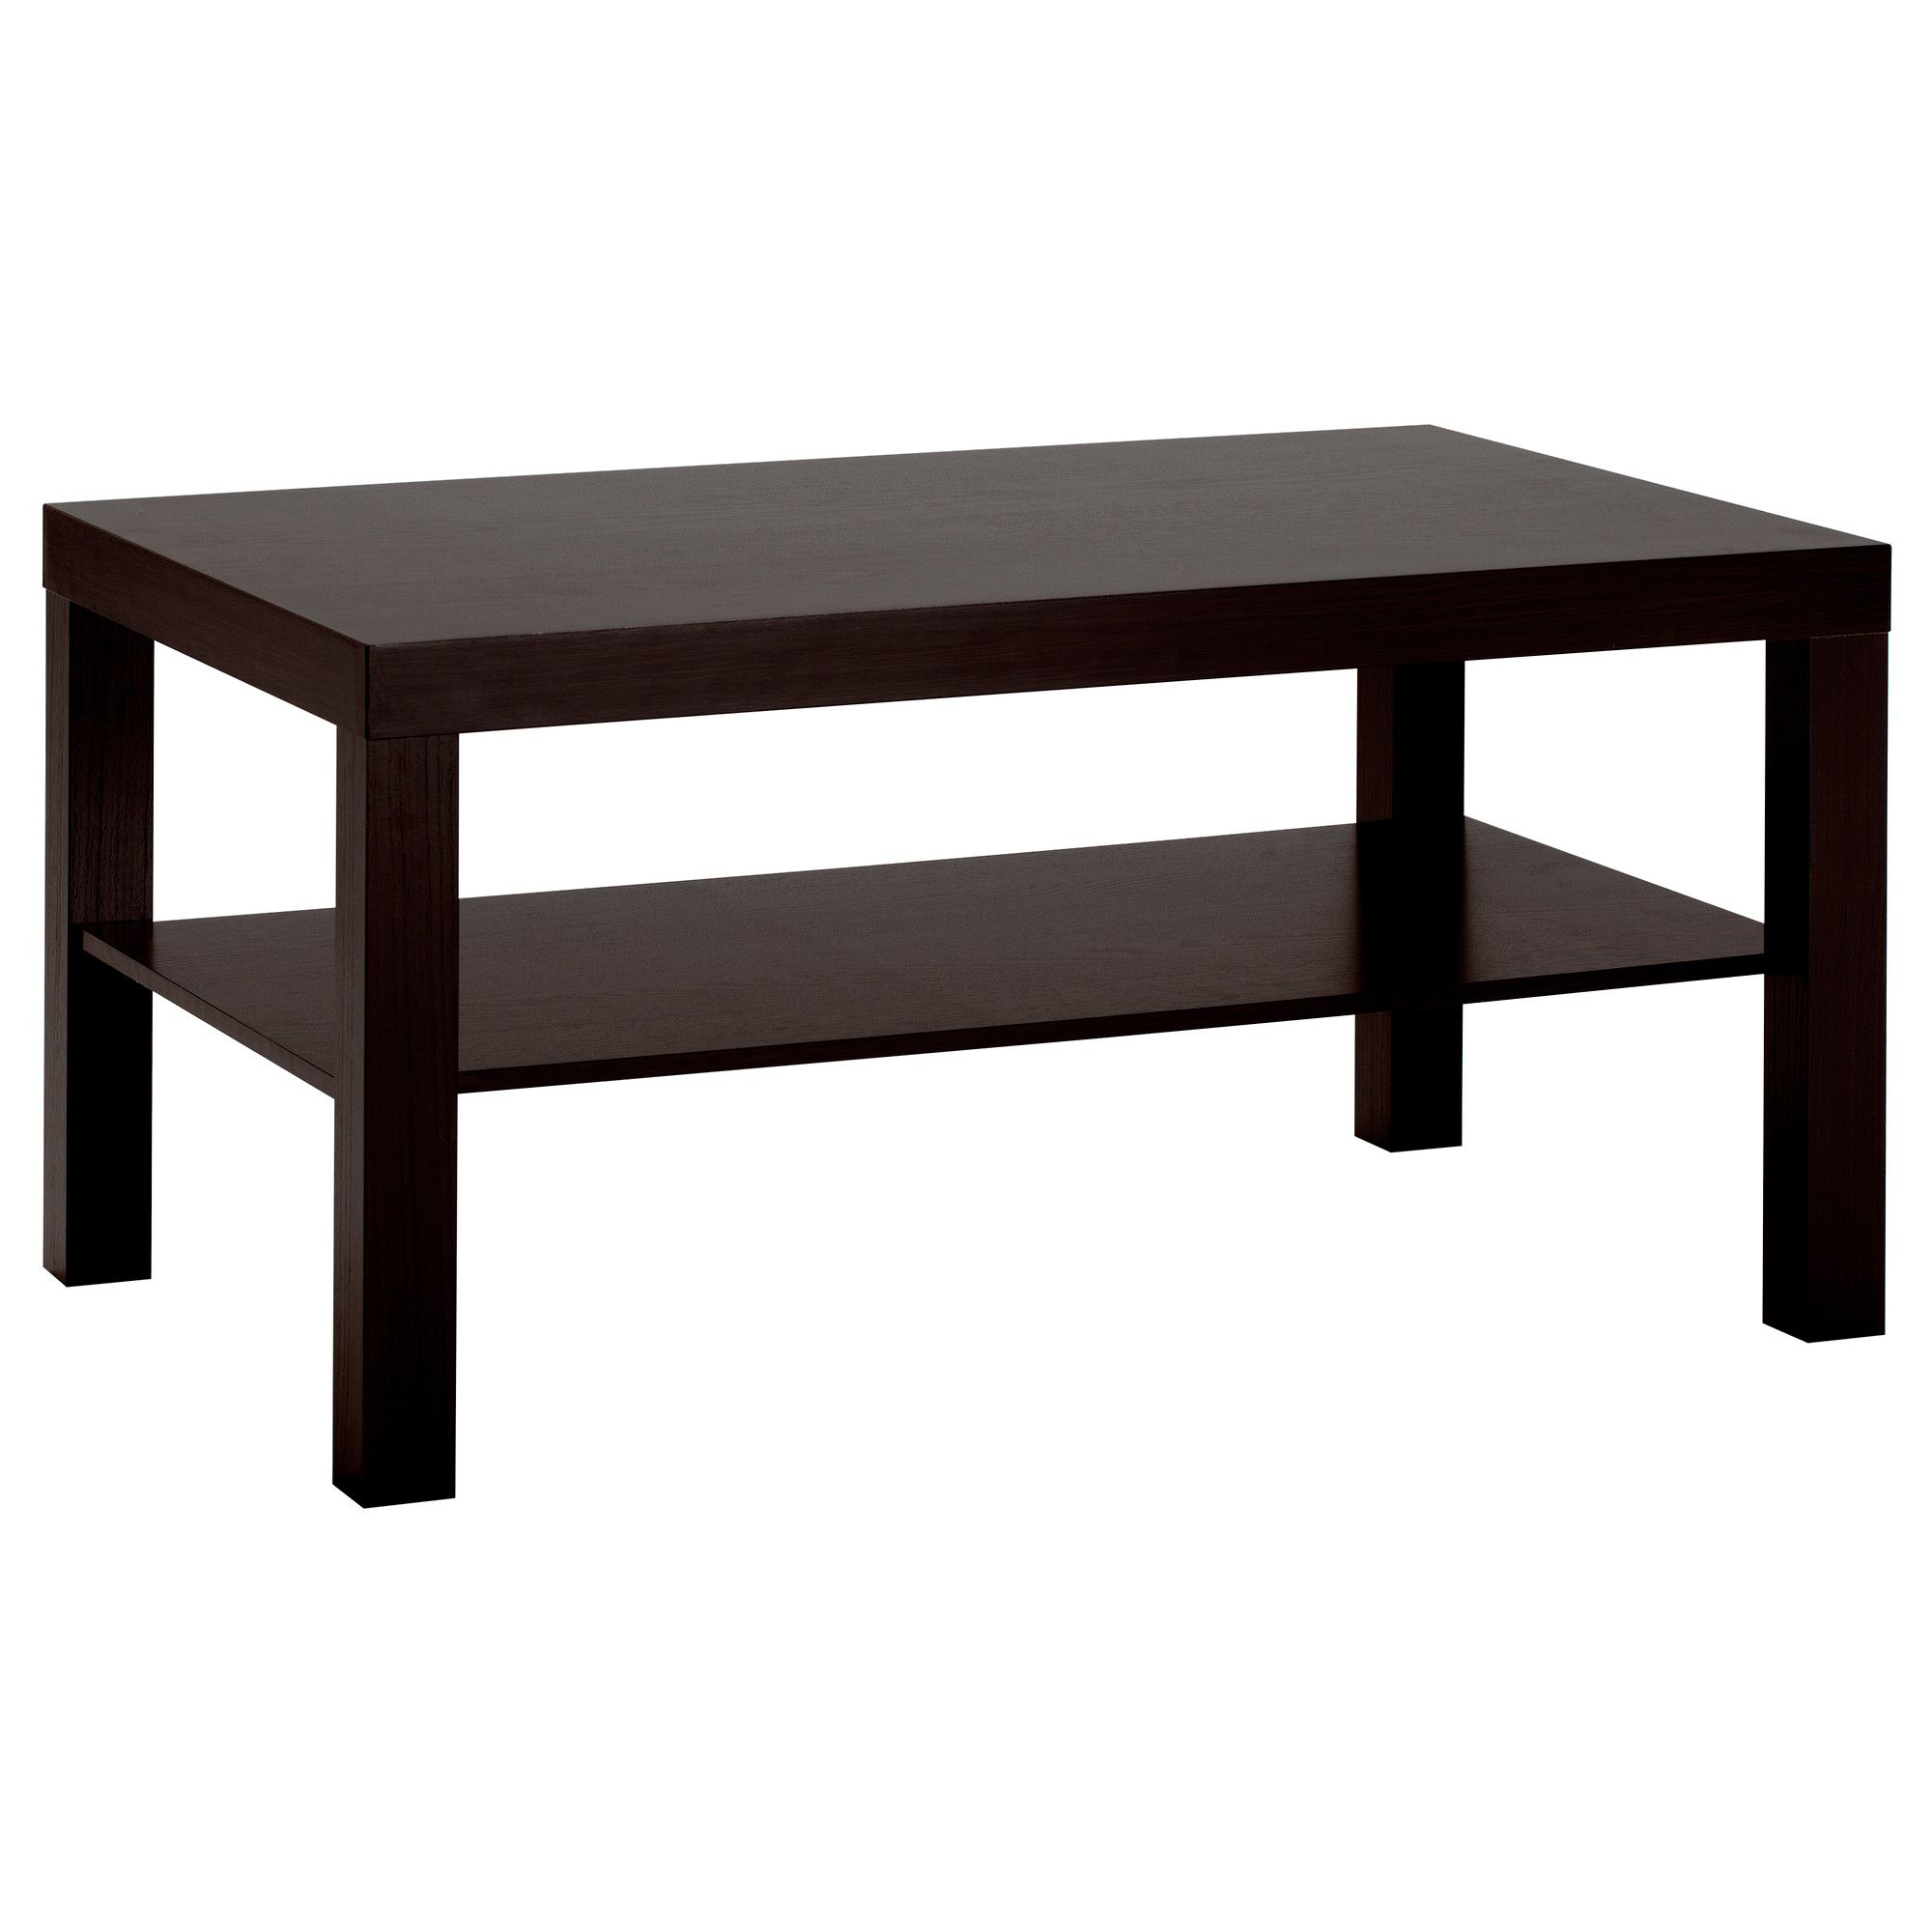 Lack Coffee Table Black Brown 90x55 Cm (View 2 of 20)